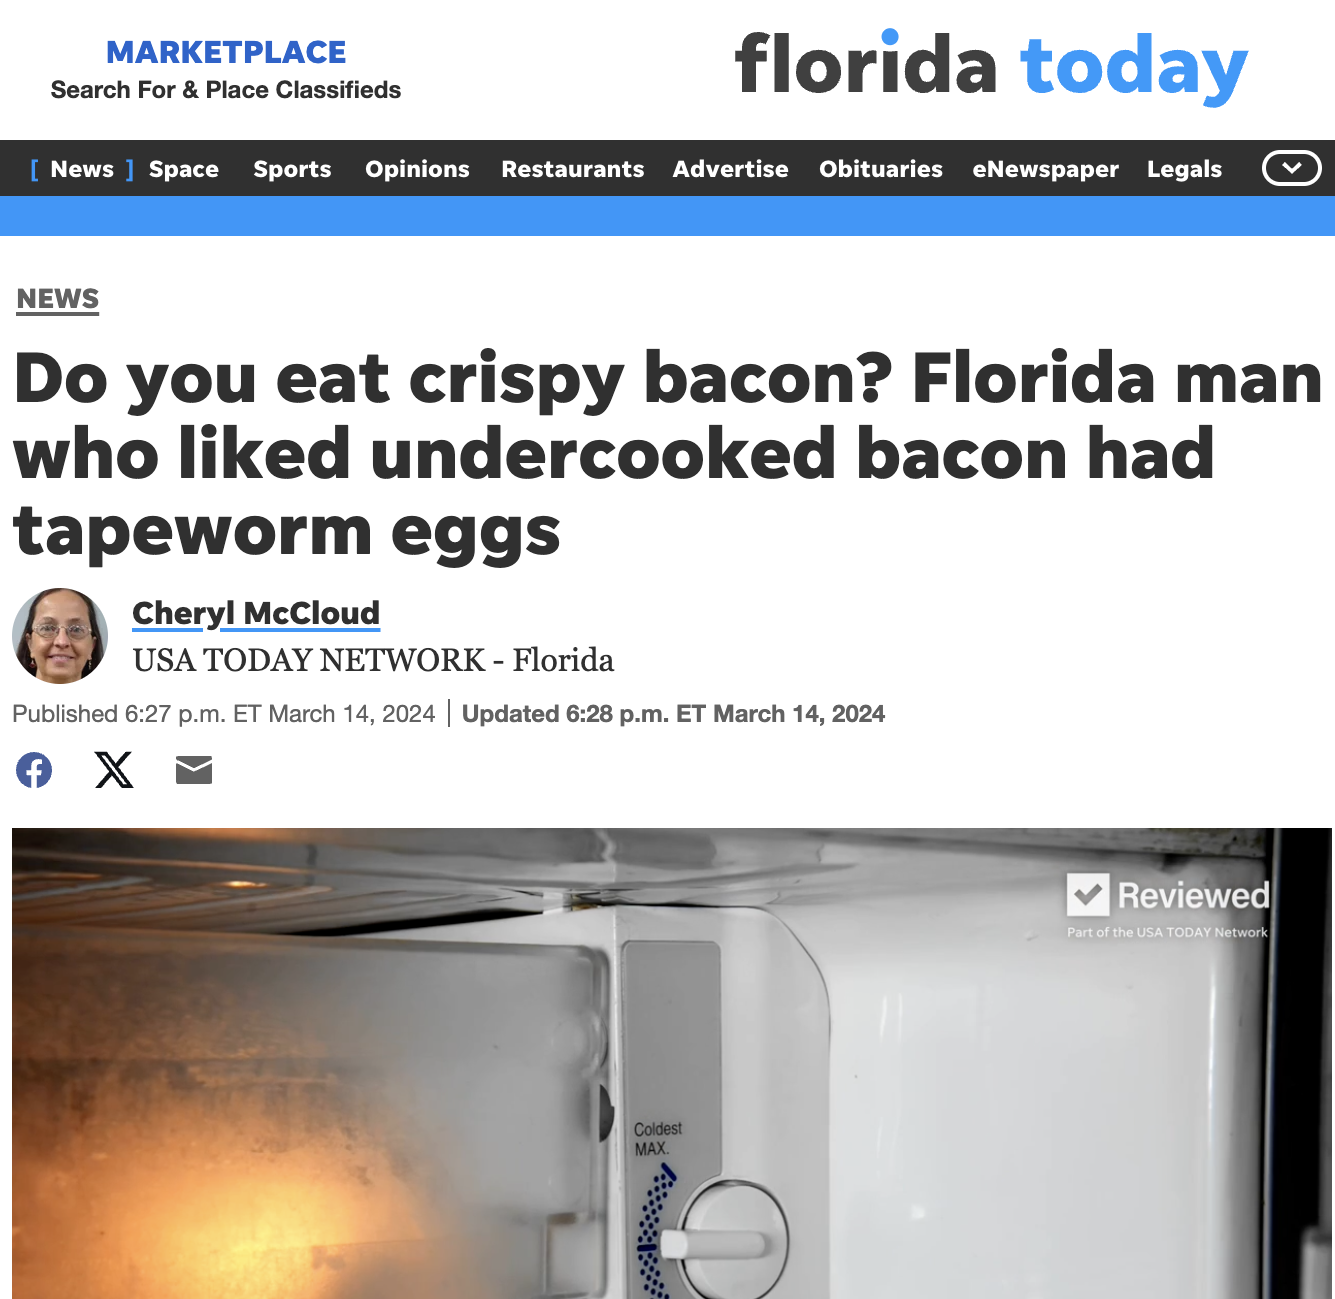 media - Marketplace Search For & Place Classifieds florida today News Space Sports Opinions Restaurants Advertise Obituaries eNewspaper Legals News Do you eat crispy bacon? Florida man who d undercooked bacon had tapeworm eggs Cheryl McCloud Usa Today Net